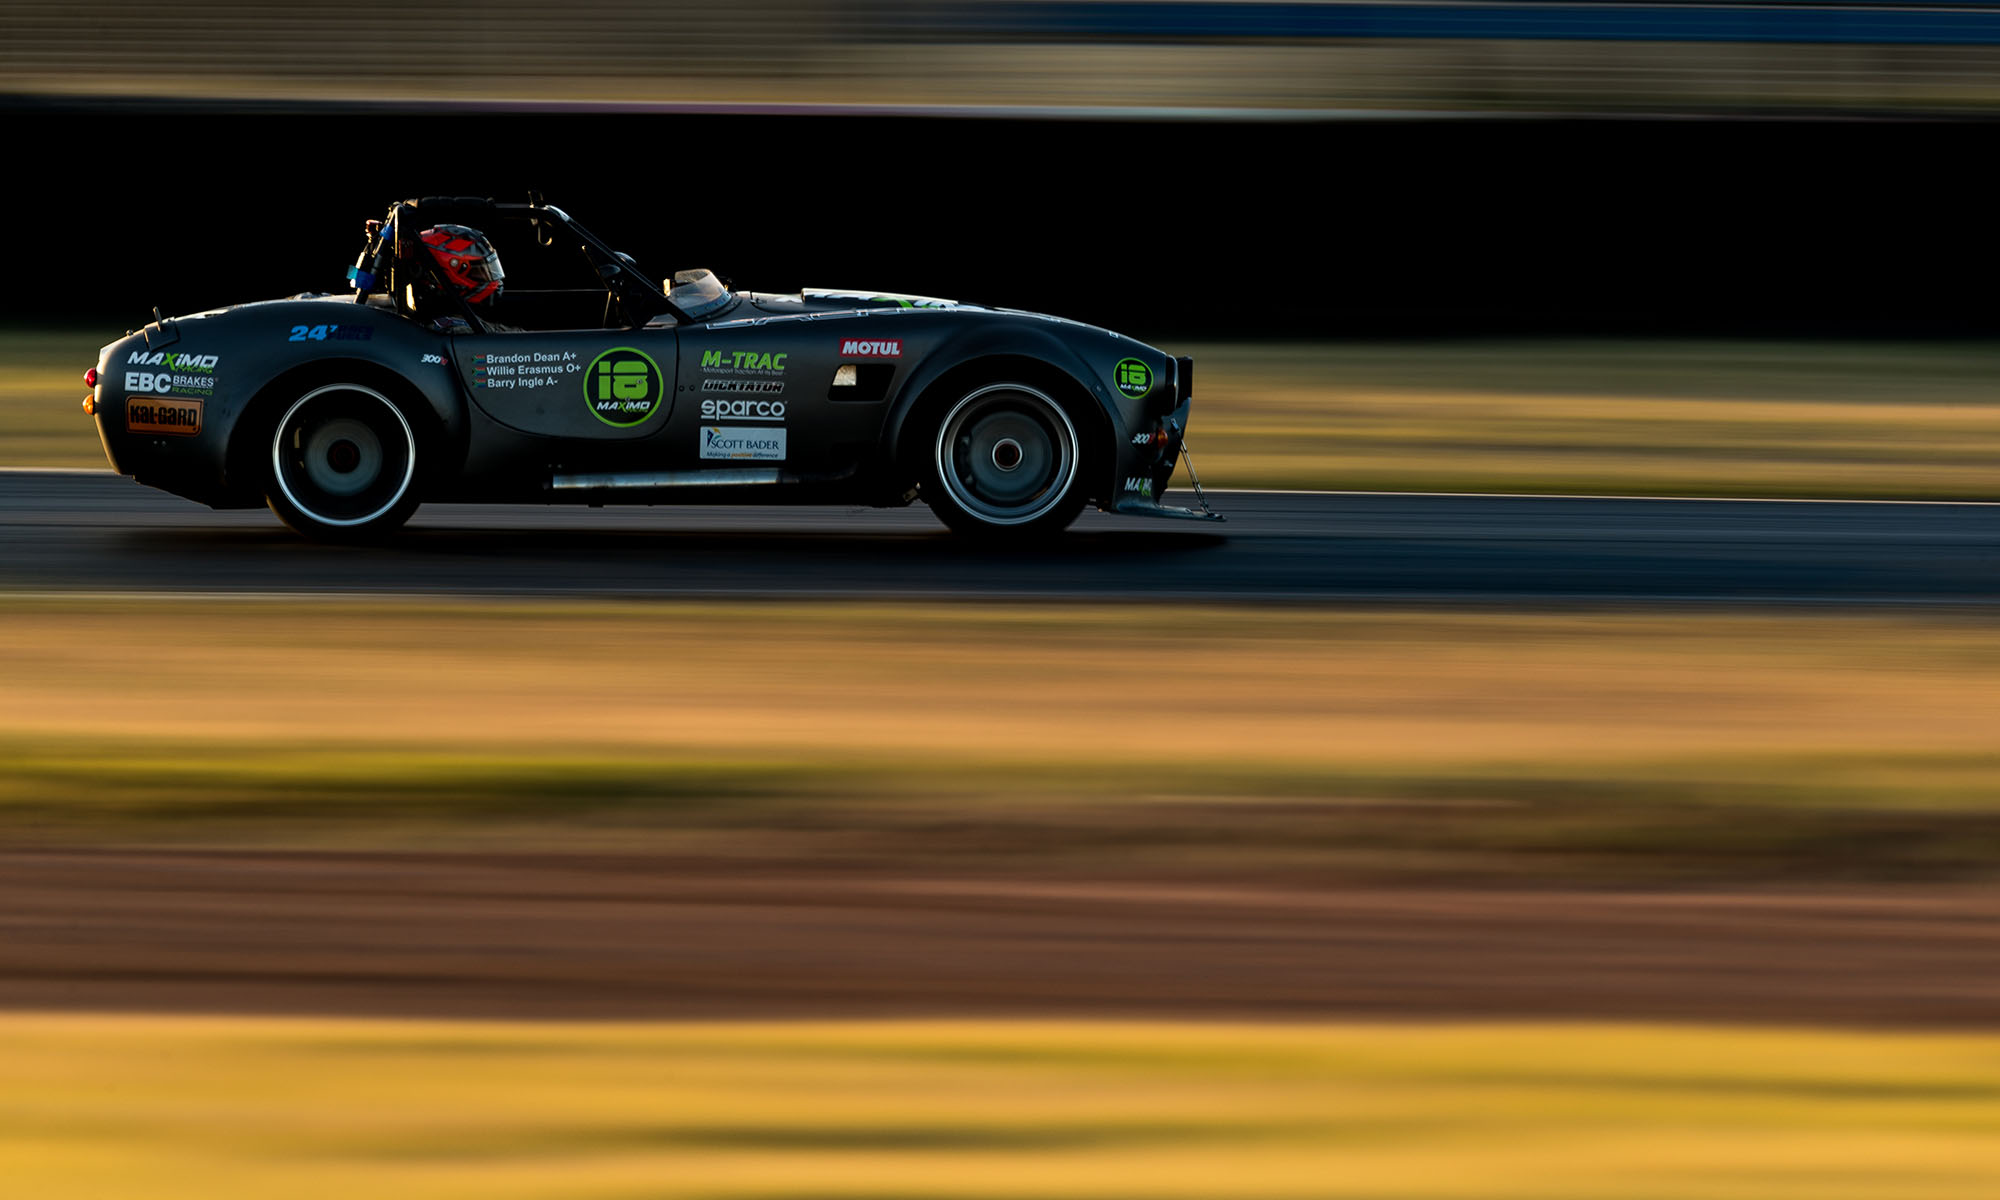 Maximo Racing's Brackdraft roadster at dusk, the team finished 8th overall.